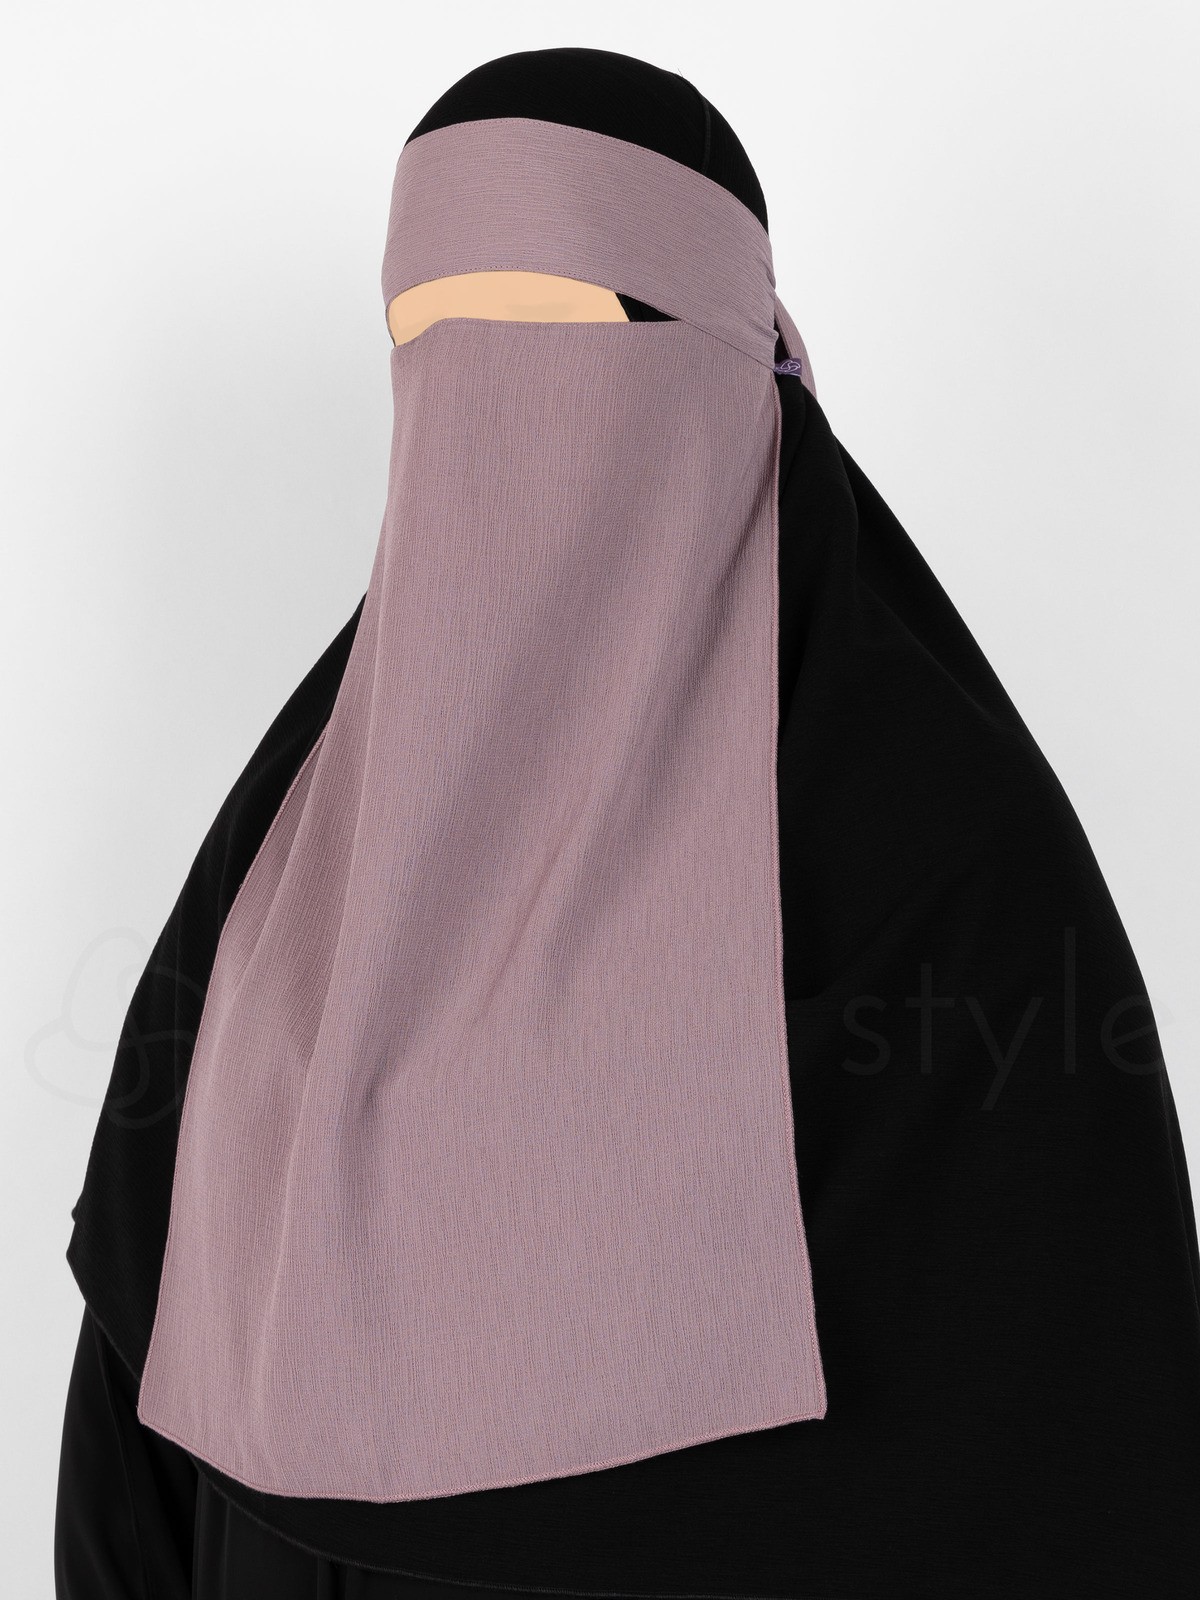 Sunnah Style - Brushed One Layer Niqab (Elderberry)